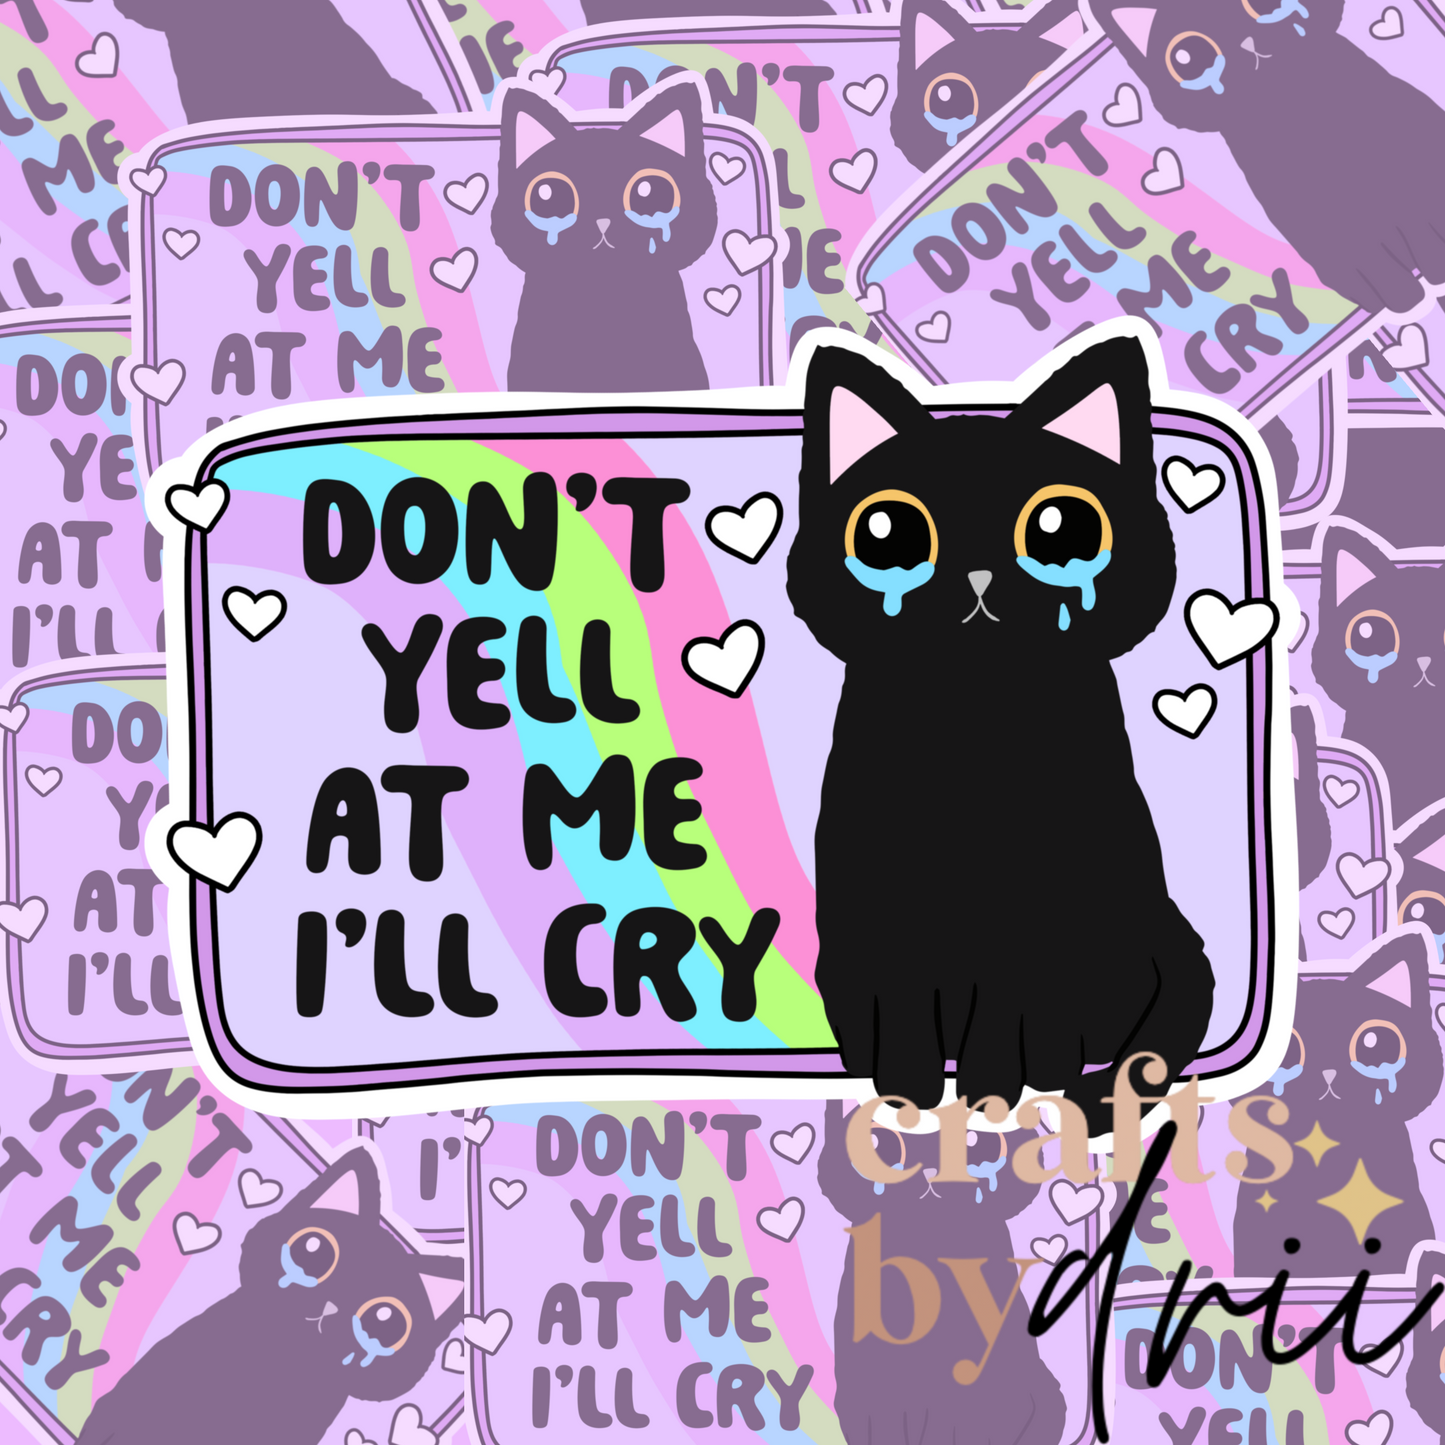 Dont yell at me or I’ll cry Sticker